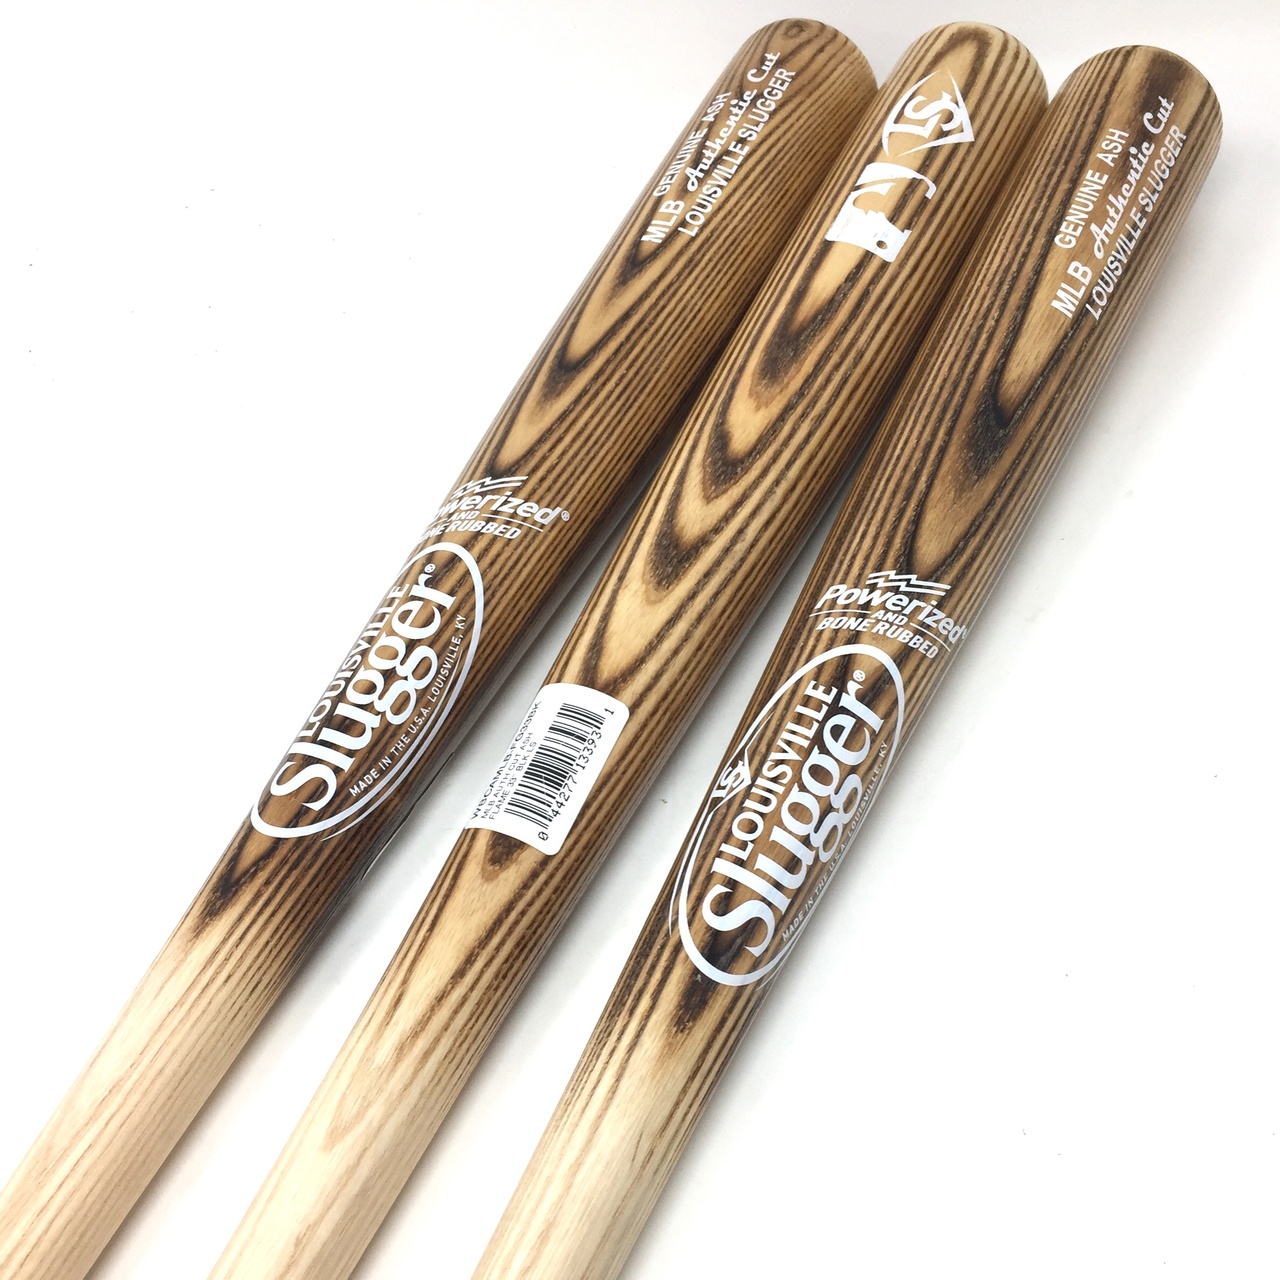 33 inch wood baseball bats by Louisville Slugger. MLB Authentic Cut Ash Wood. 33 inch. Black Lizard Skin Grip. Powerized and Bone Rubbed. 3 bats in this bat pack.